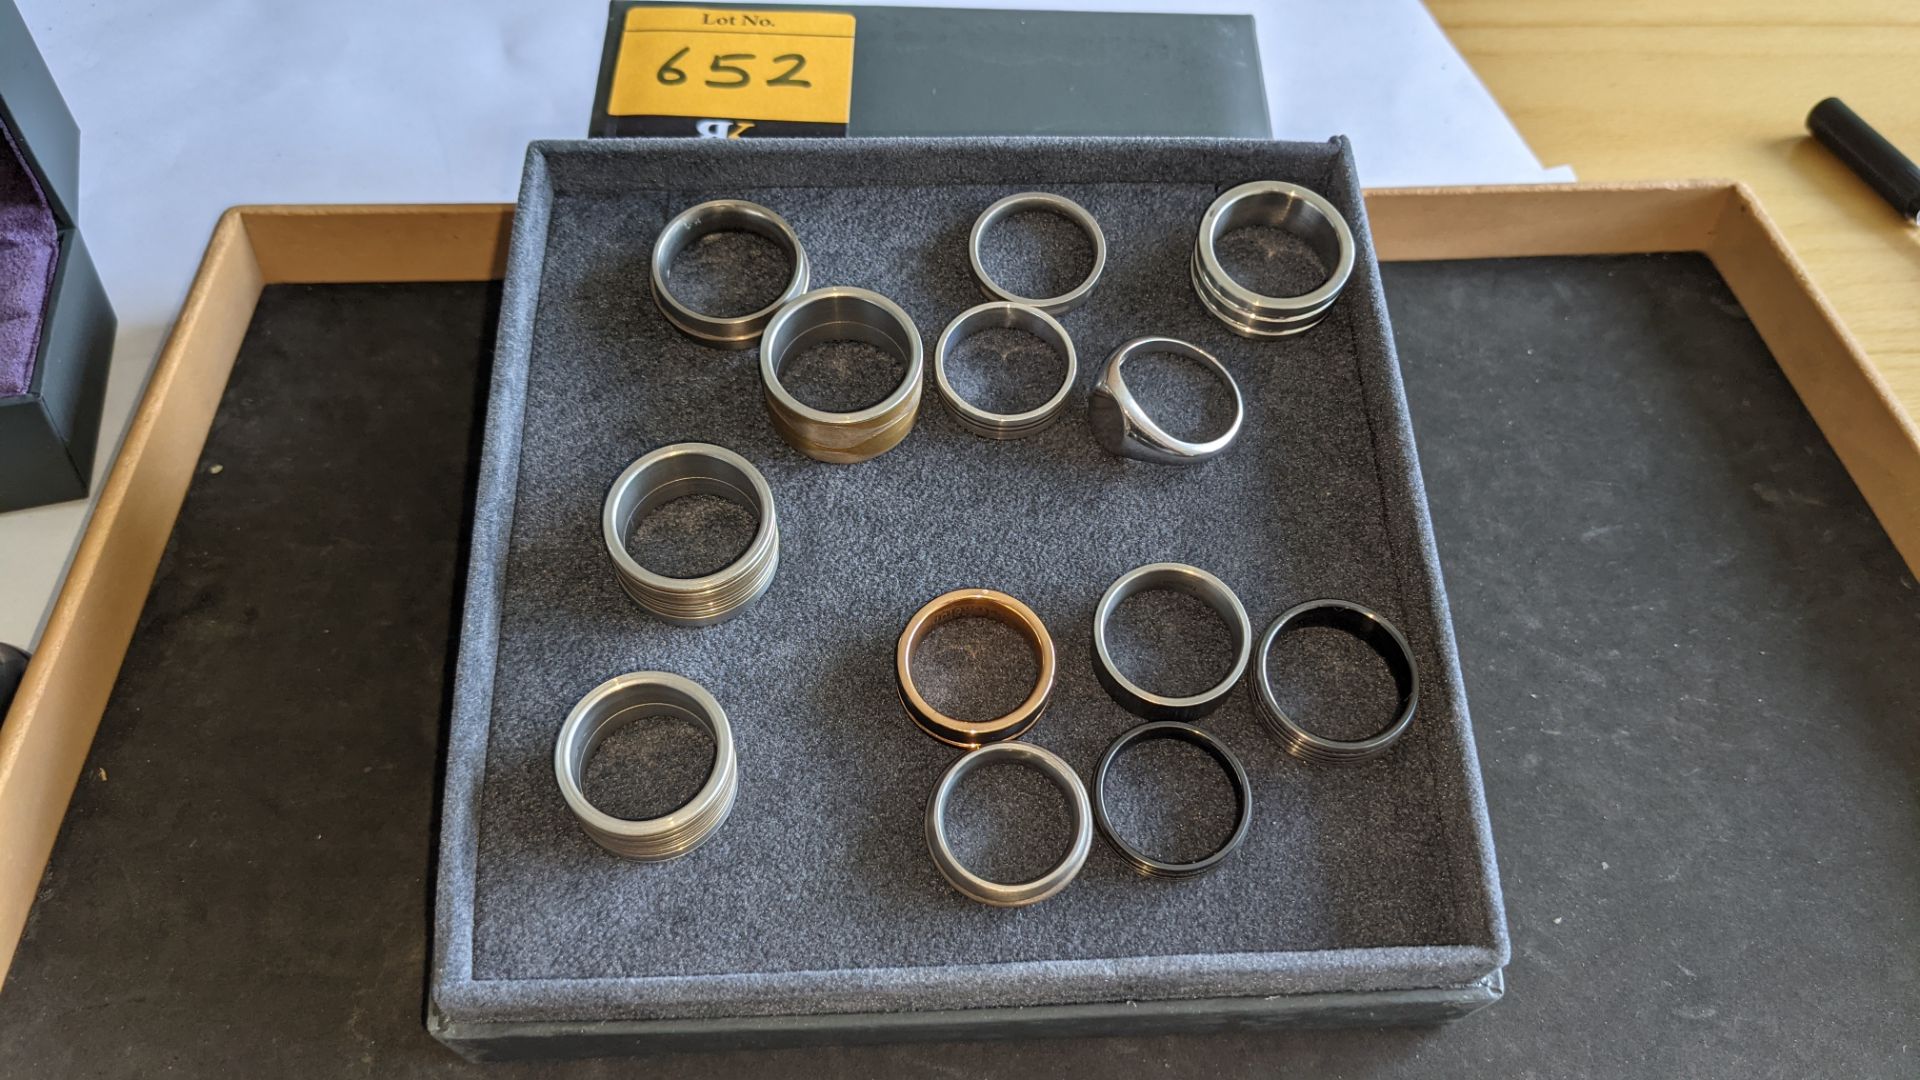 13 assorted men's rings. Understood to be made of a variety of materials including silver, stainless - Image 2 of 8